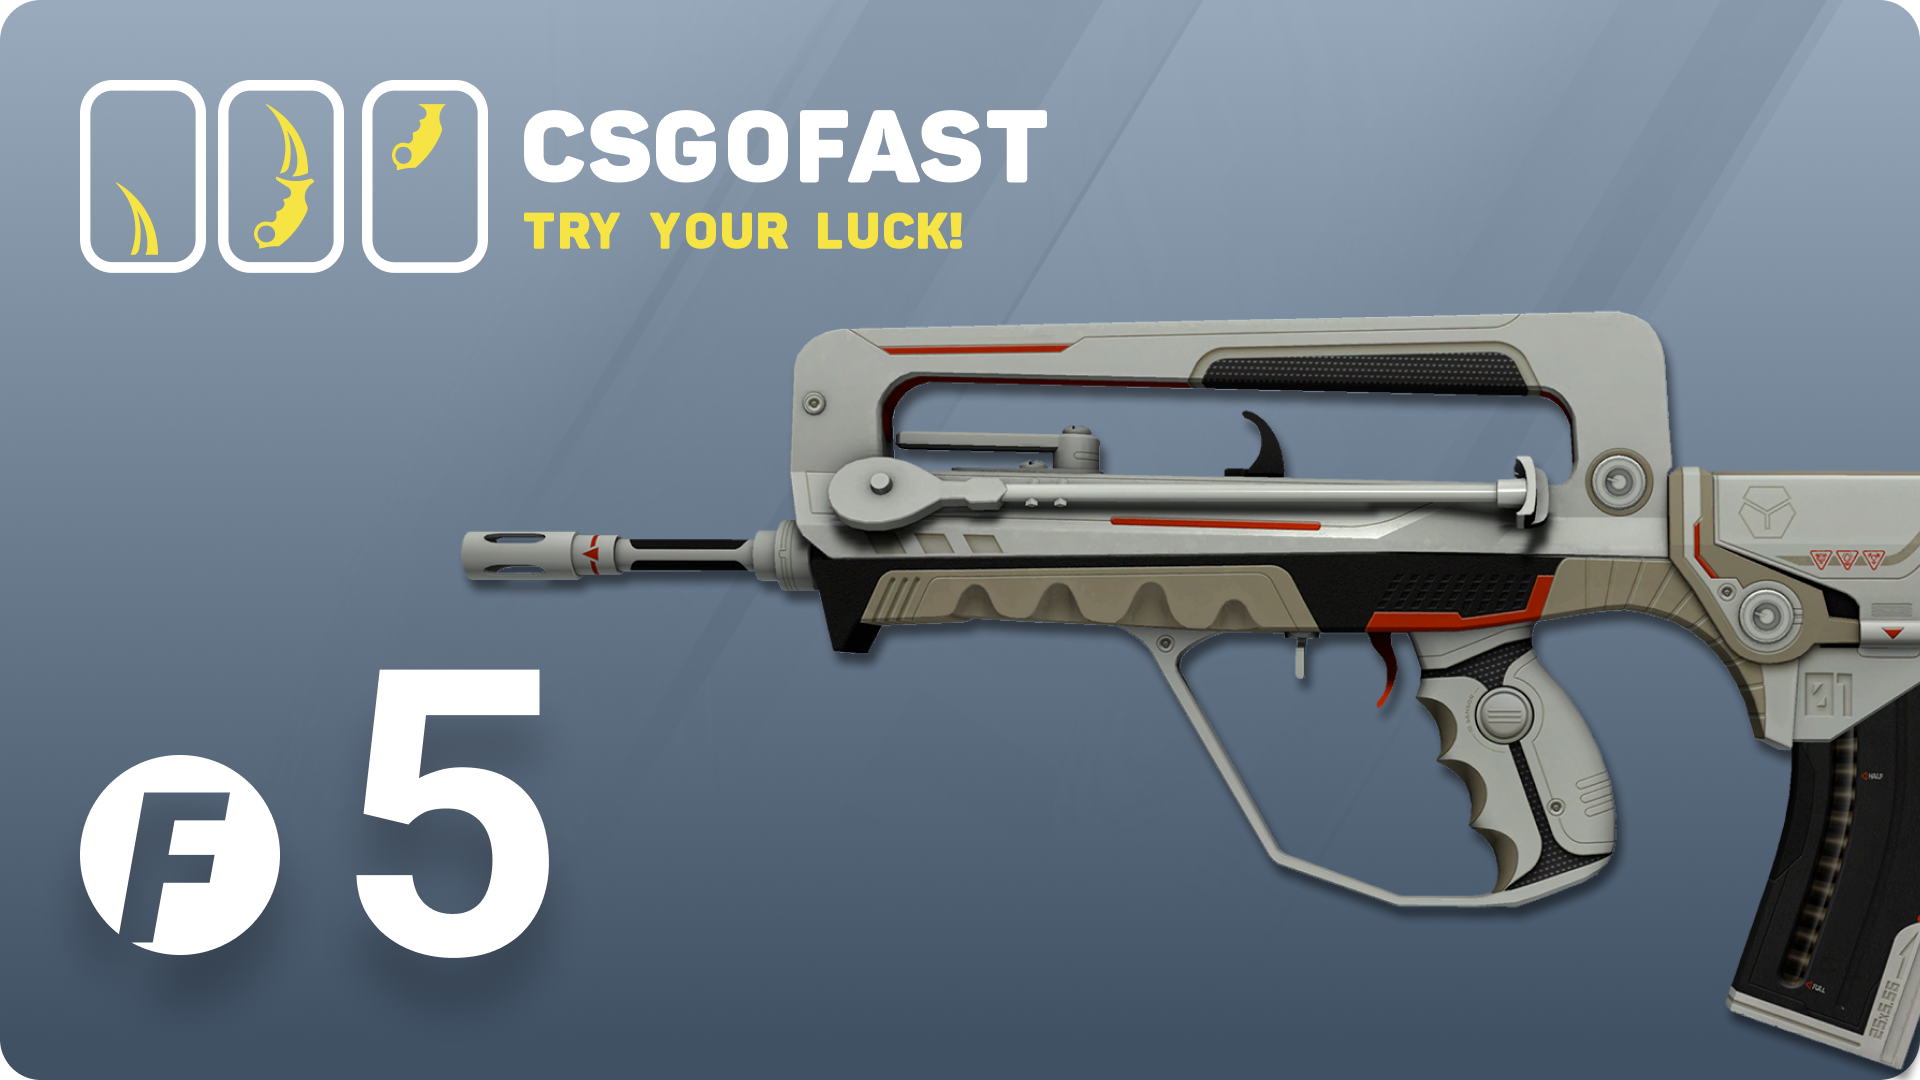 CSGOFAST 5 Fast Coins Gift Card 3.63 USD